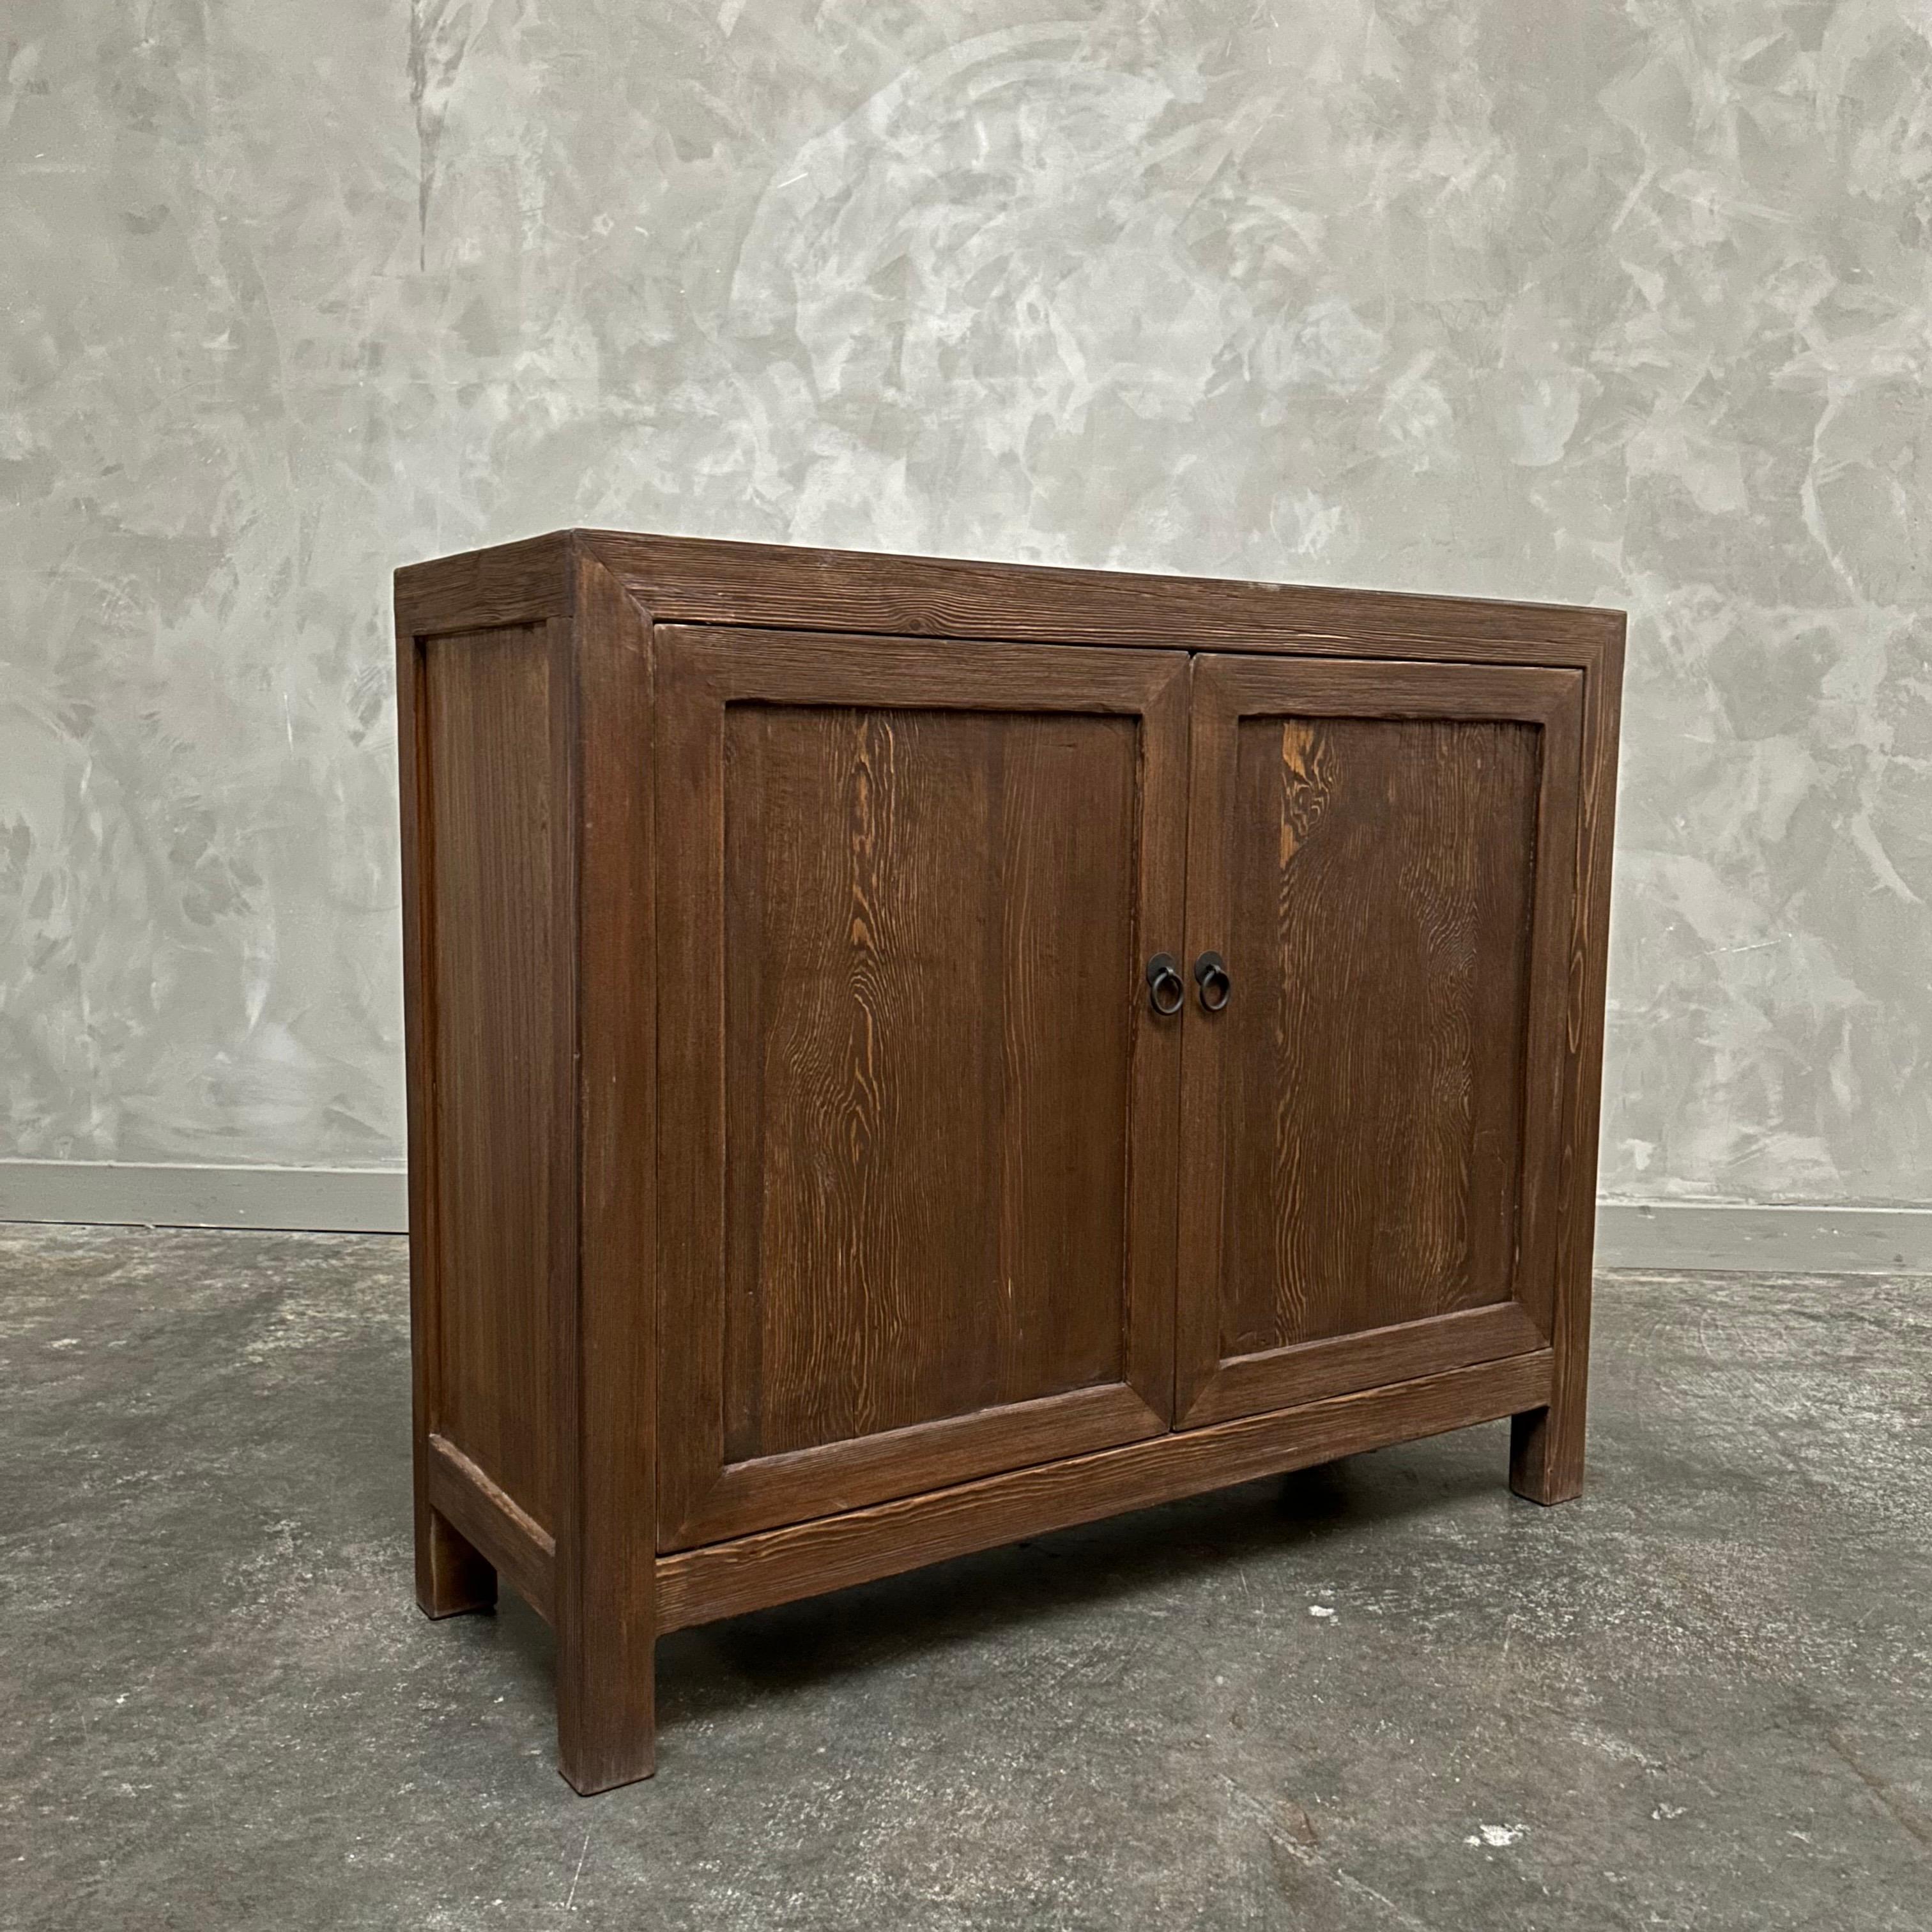 Custom made Wales 2-door cabinet, made from solid reclaimed woods.
Finish: Dark Walnut
Dimensions: 40”w x 14”d x 33”h
Great for an entry way, sideboard, or storage for a small space.
Please note there may be slight variations due to the finish of